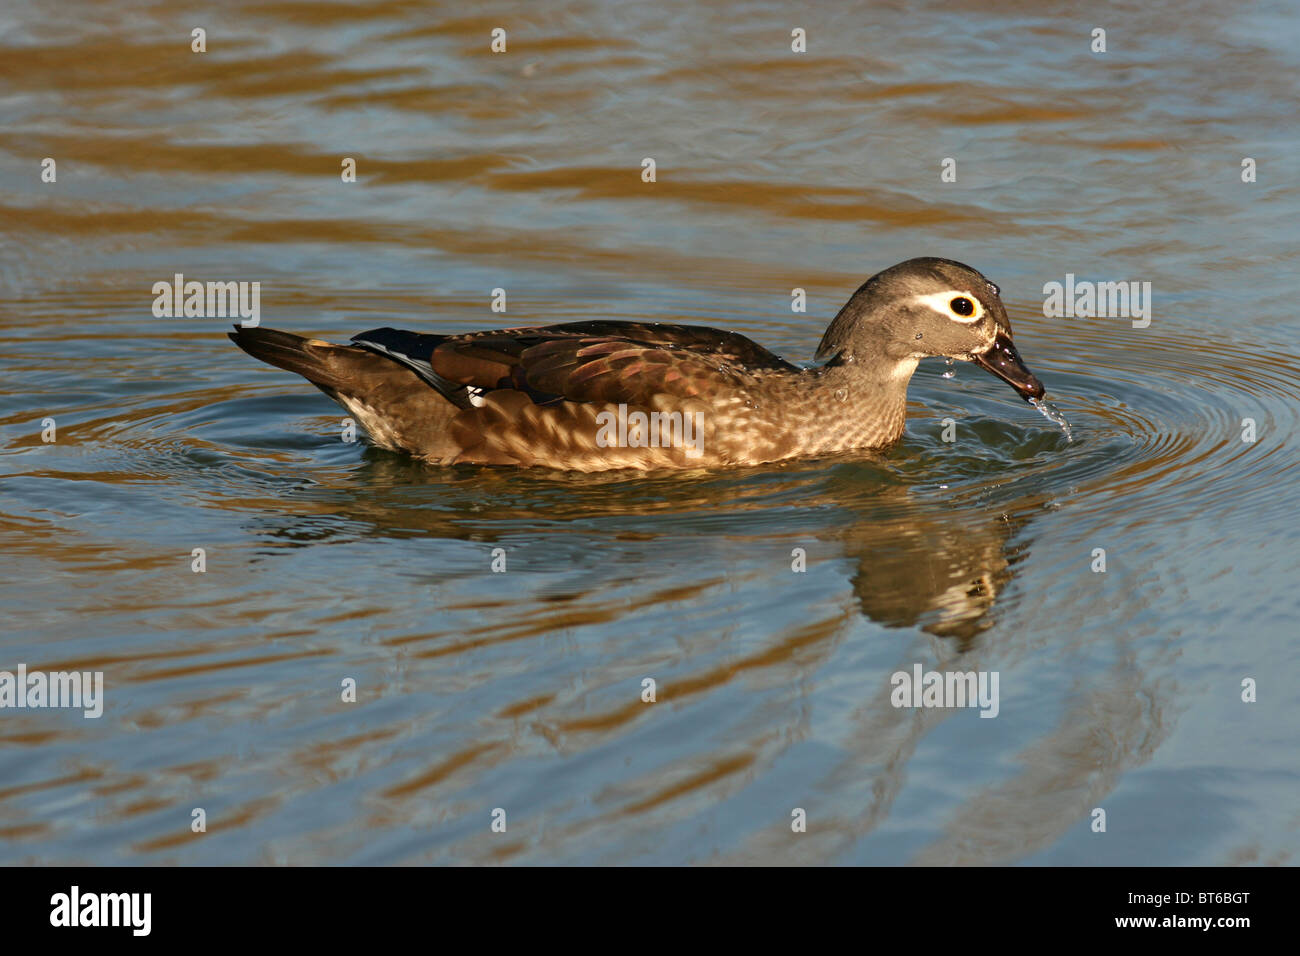 Female wood duck swimming on pond Stock Photo